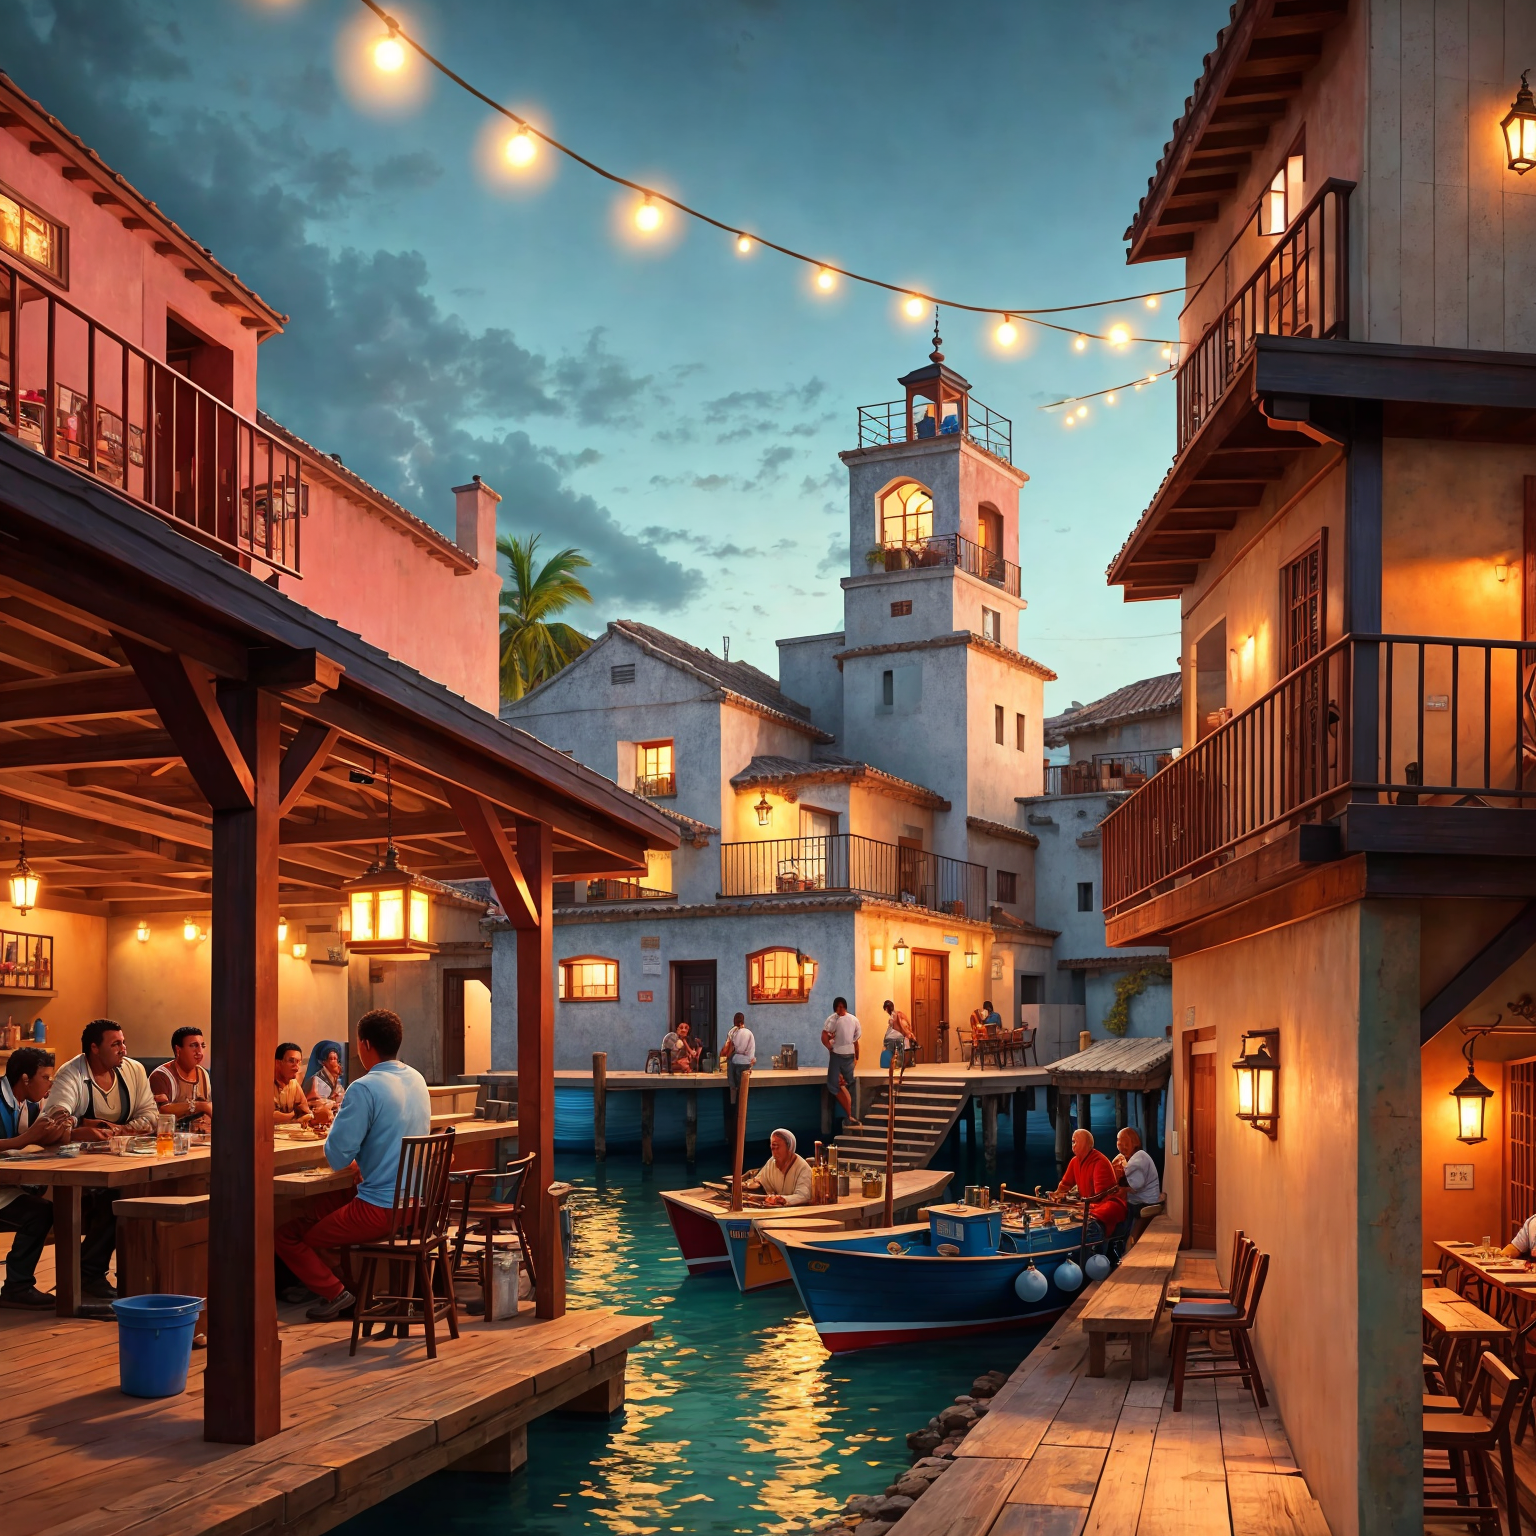 dock workers coastal village cantina patio (SouthOfTheBorderSD15:1)
(masterpiece:1.1) (best quality) (detailed) (intricate...